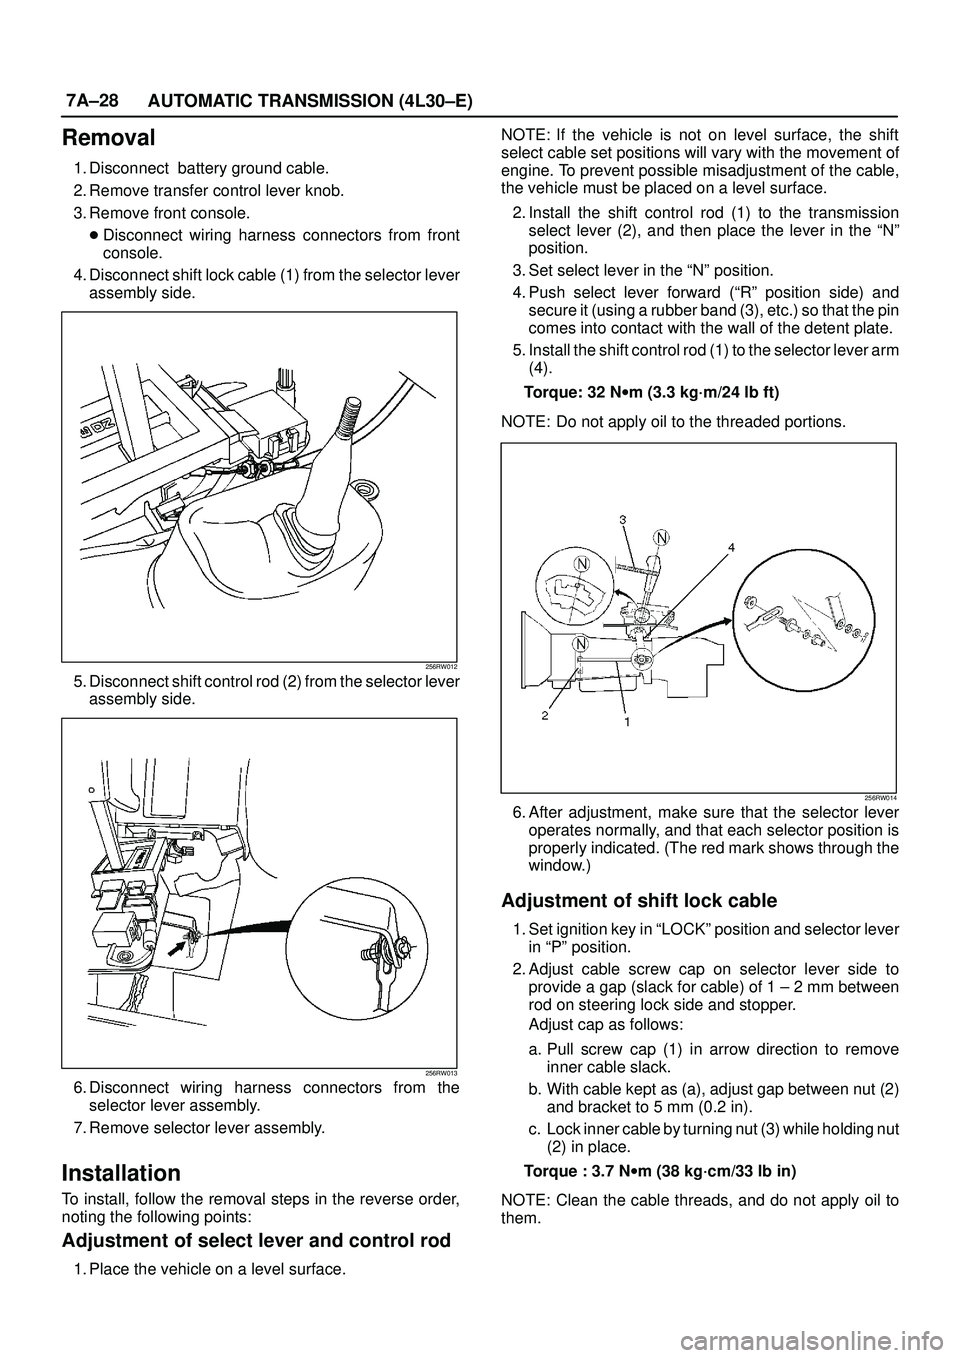 ISUZU TROOPER 1998  Service Repair Manual 7A±28
AUTOMATIC TRANSMISSION (4L30±E)
Removal
1. Disconnect  battery ground cable.
2. Remove transfer control lever knob. 
3. Remove front console.
Disconnect wiring harness connectors from front
c